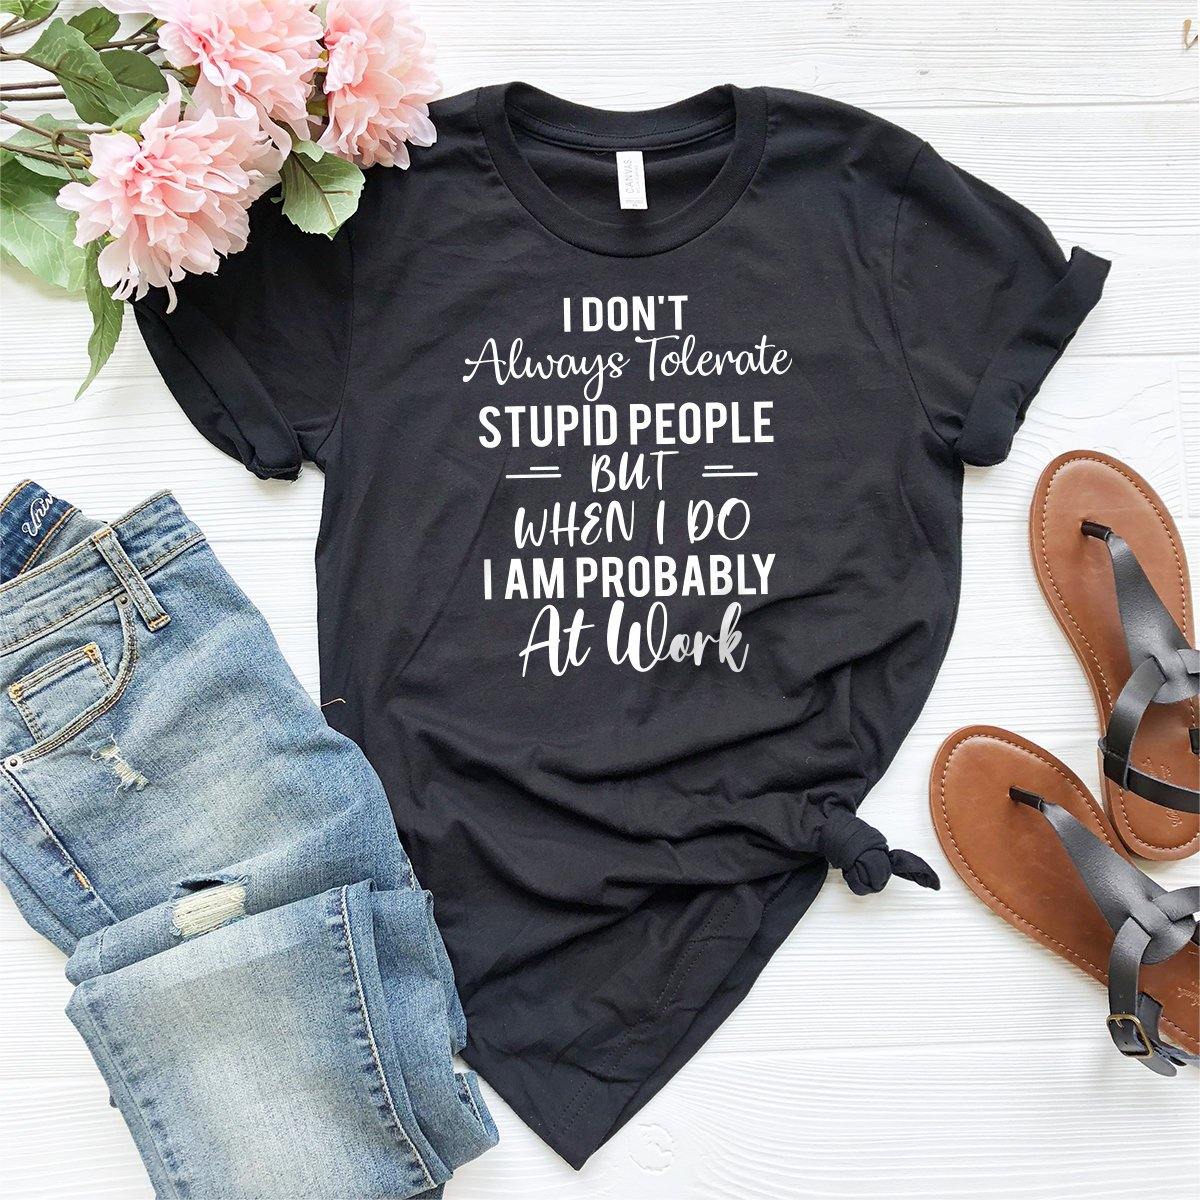 Work Shirt, I Don't Always Tolerate Stupid People But When I Do I Am Probably At Work T-Shirt, Work Hard Shirt - Fastdeliverytees.com